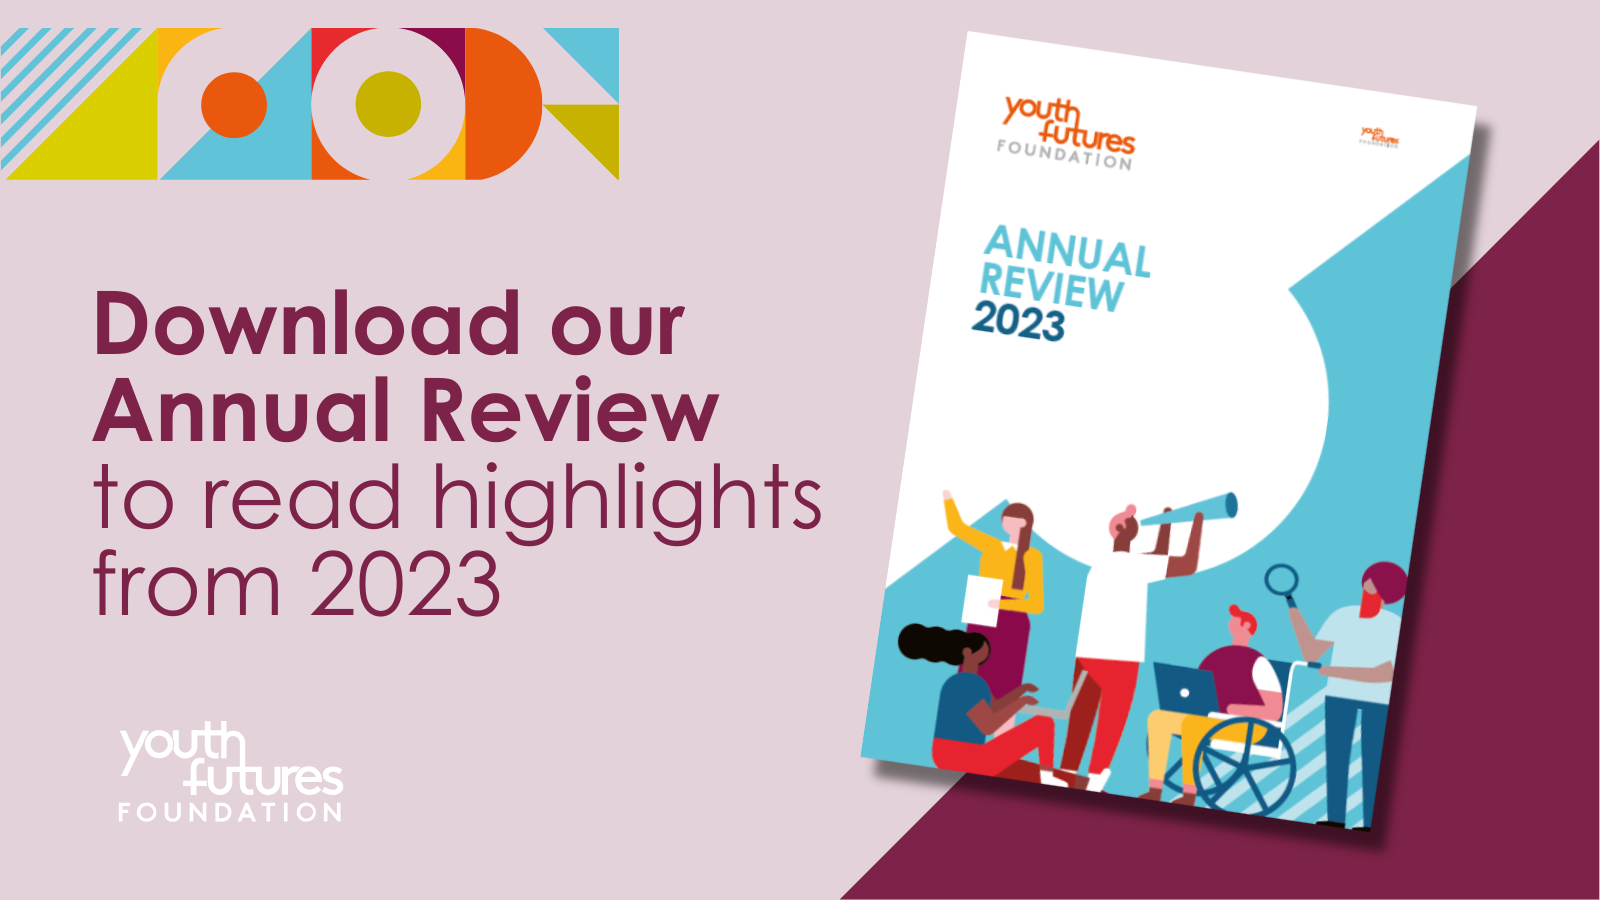 Download our annual review to read highlights from 2023